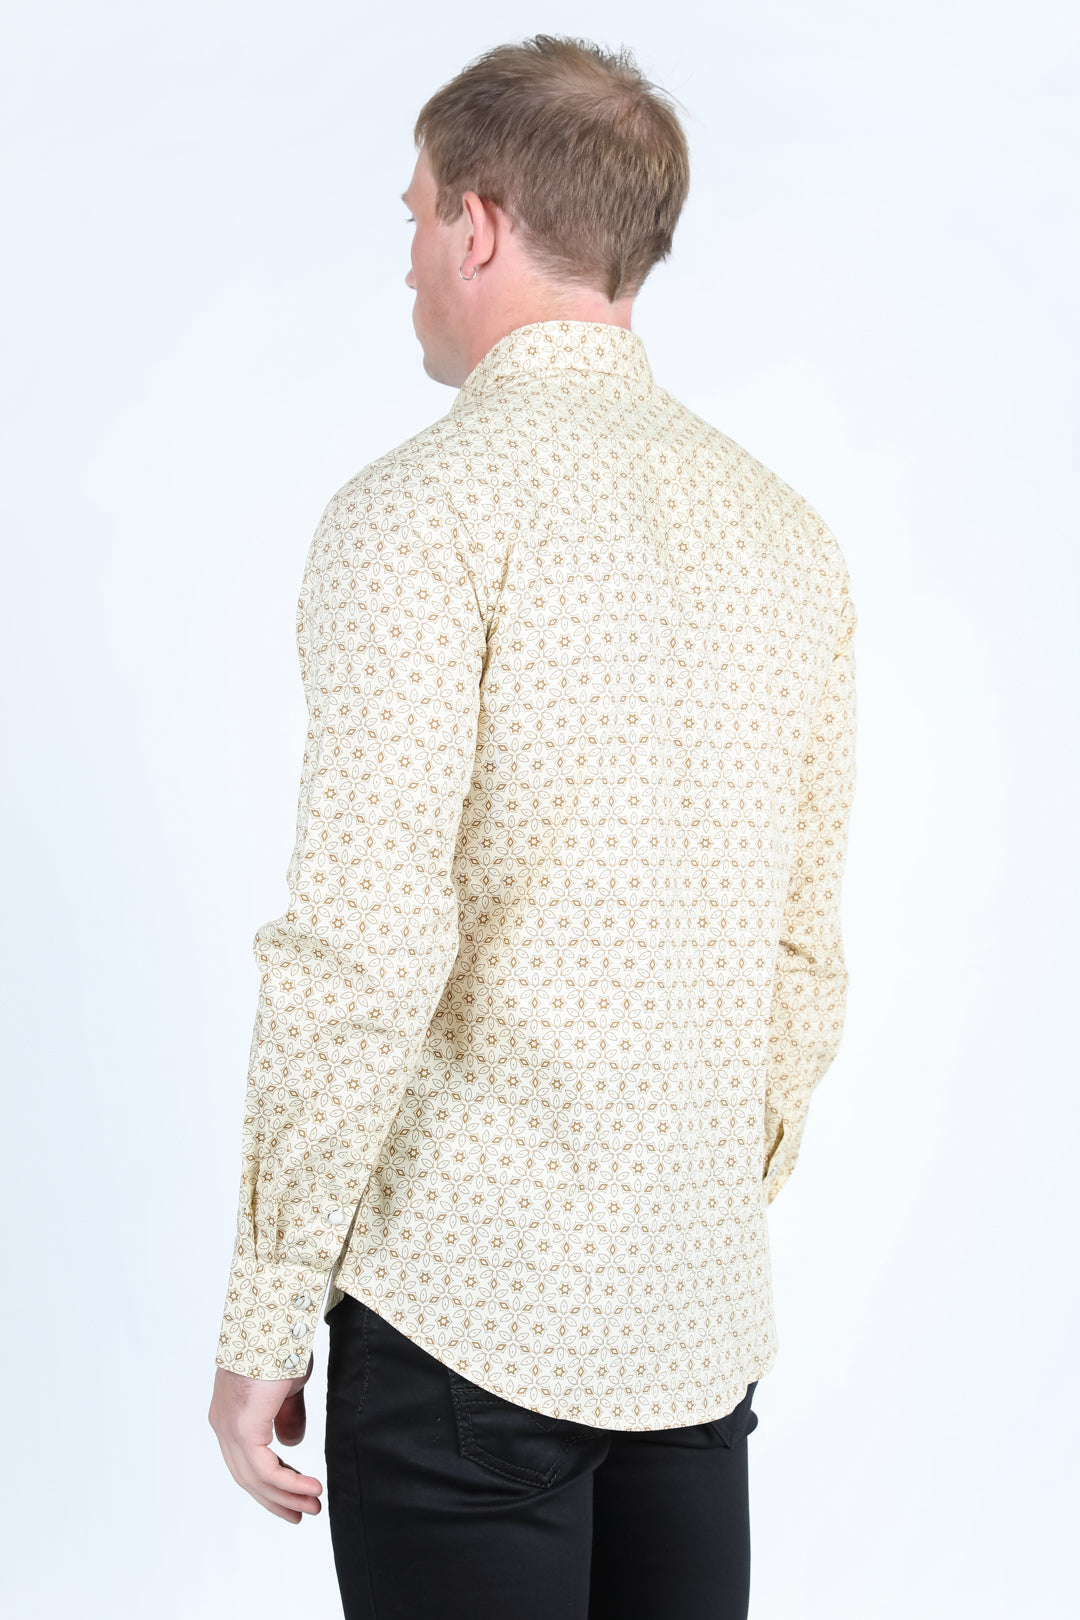 Mens Western Modern Fit Cotton/Spandex Long Sleeve Shirt with Snaps - Beige